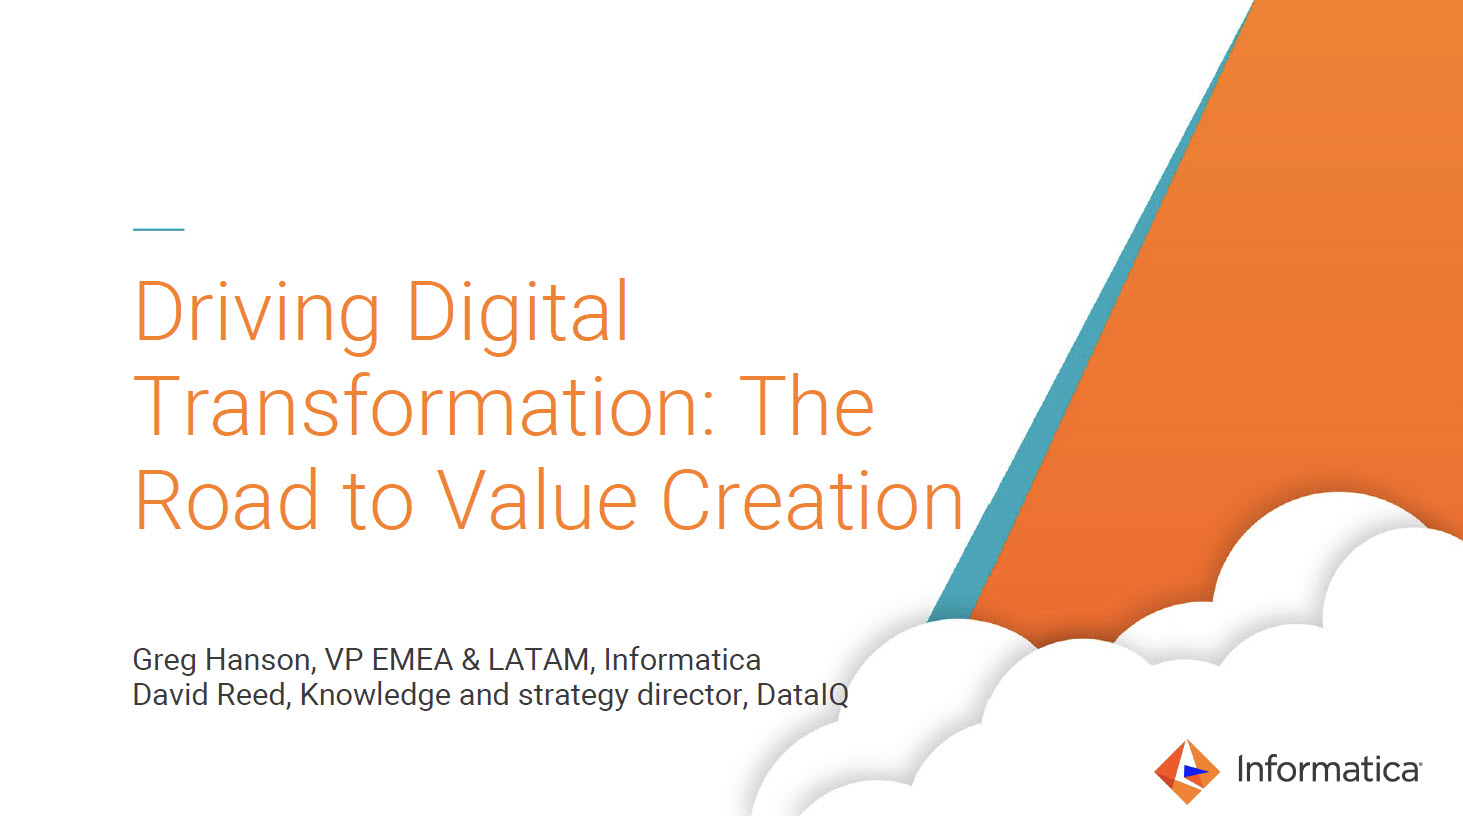 rm01-driving-digital-transformation-the-road-to-value-creation_3643151